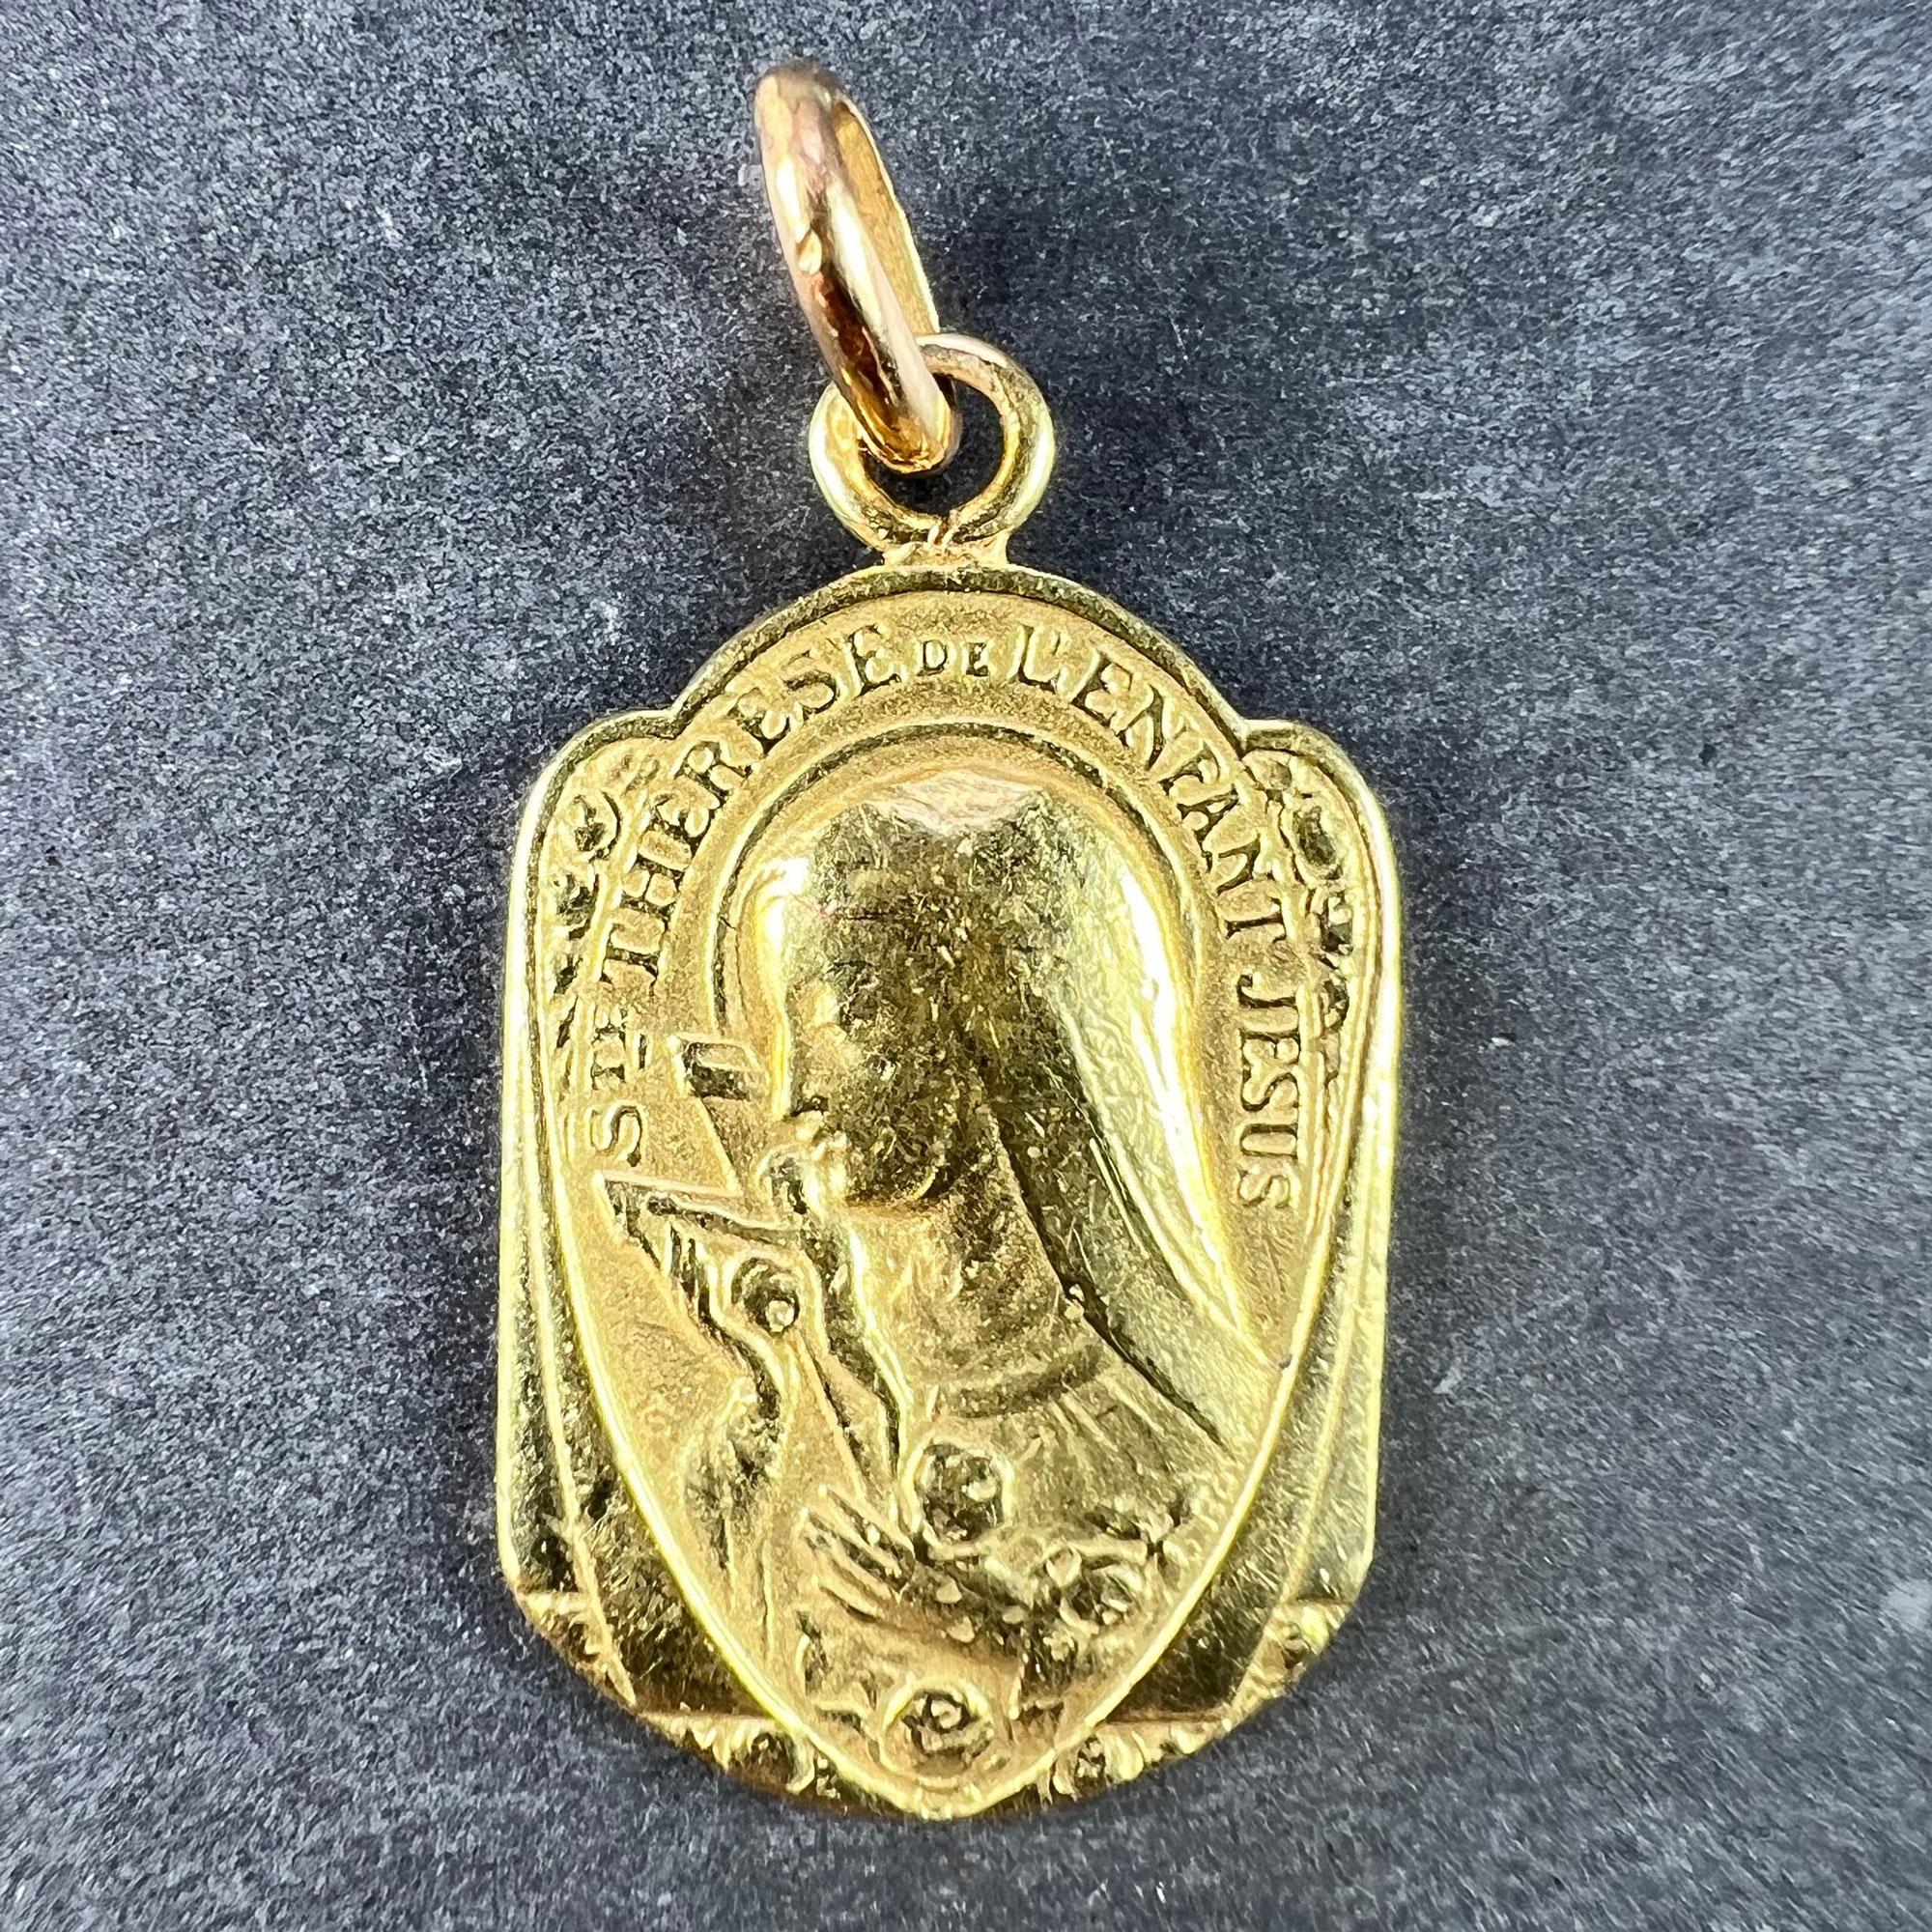 A French 18 karat (18K) yellow gold charm pendant designed as a medal depicting Saint Therese with a halo with the phrase 'ST THERESE DE L'ENFANT JESUS' (Saint Therese of the Infant Jesus) holding a crucifix and some roses, the surround with Art